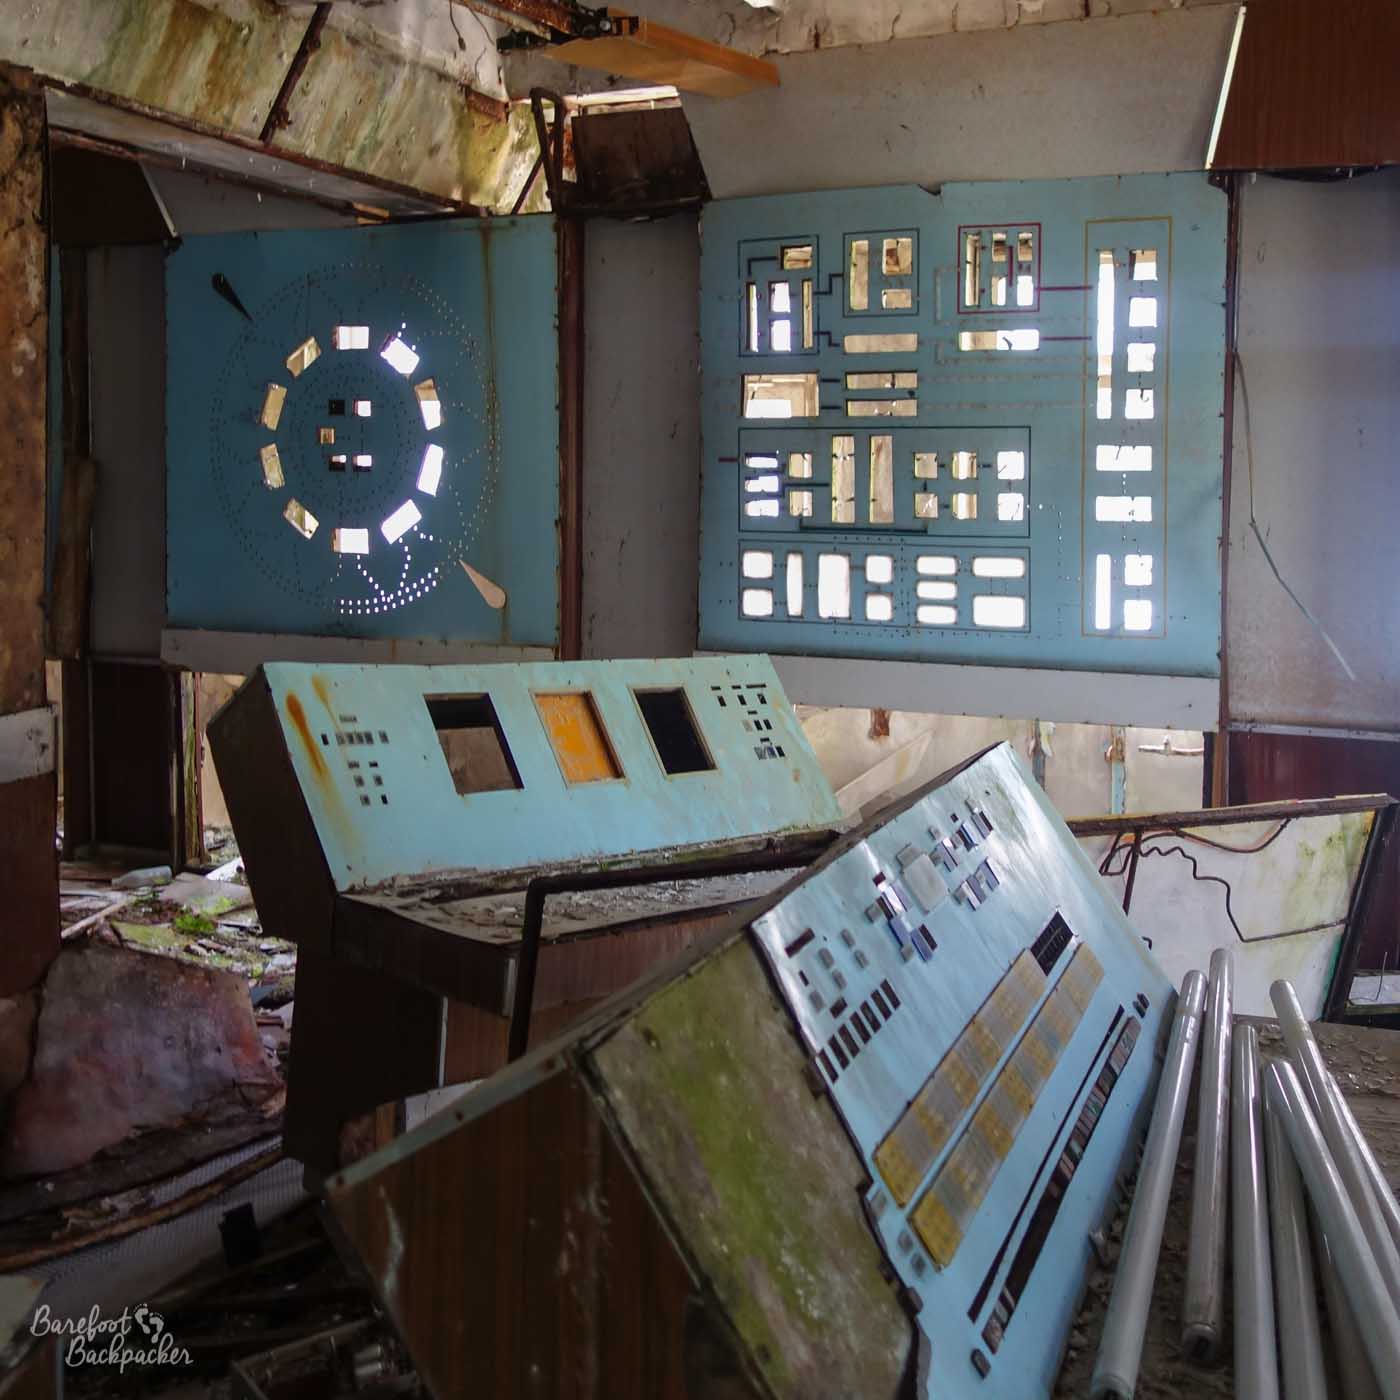 Picture of a broken and derelict control room at the Duga Array near Chernobyl. In the foreground are two control desks, with holes where buttons used to be. On the wall are two broken panels where display lights would have been.